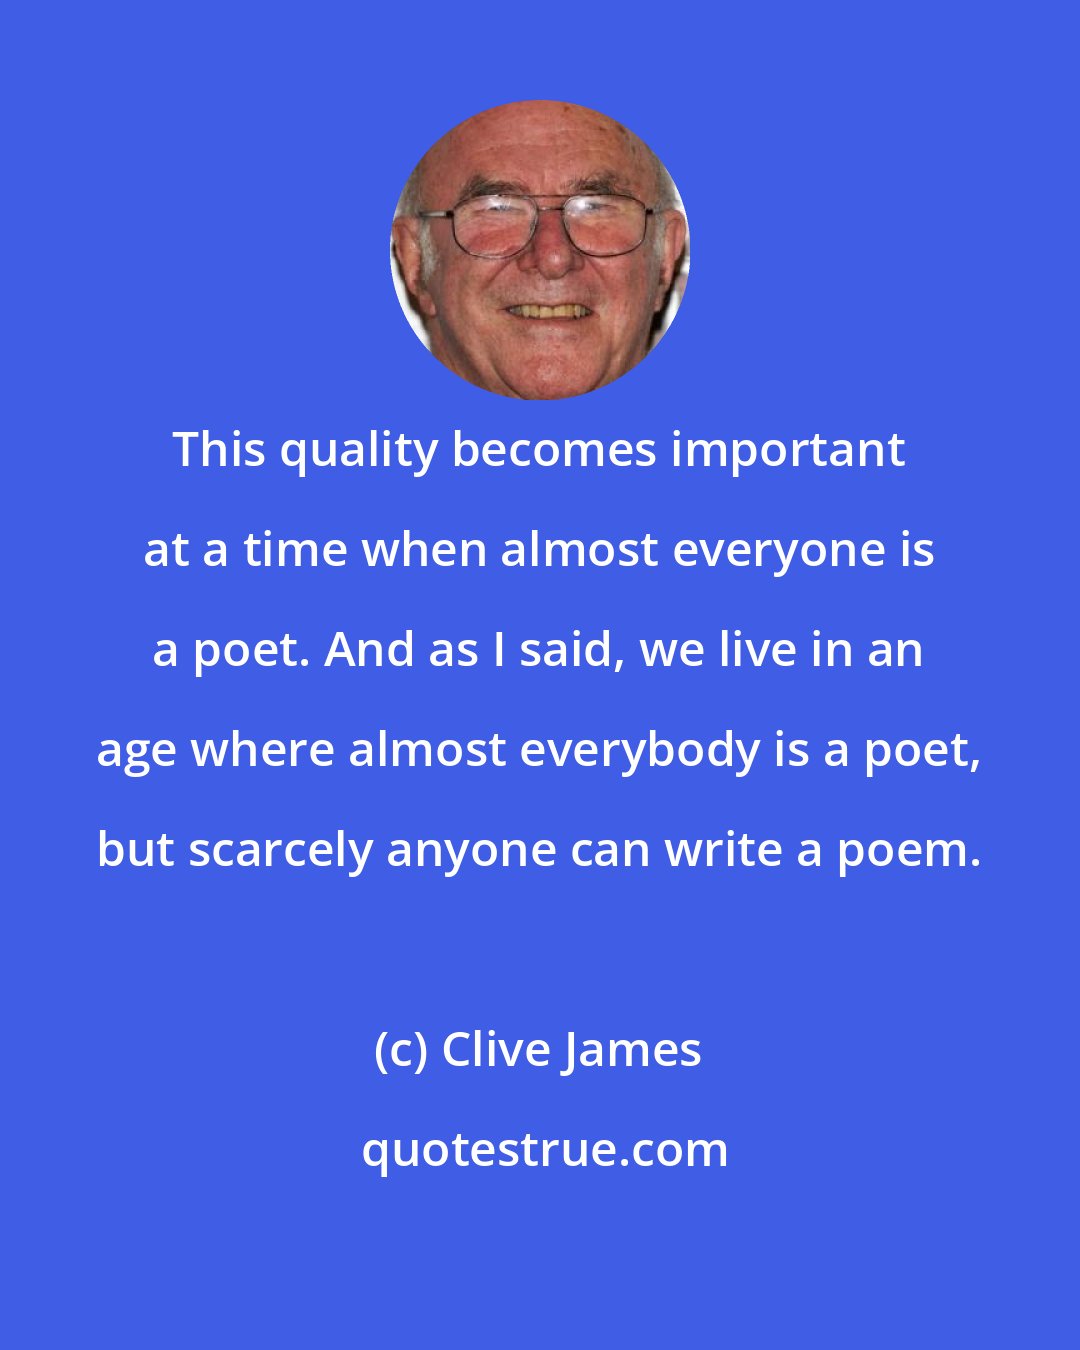 Clive James: This quality becomes important at a time when almost everyone is a poet. And as I said, we live in an age where almost everybody is a poet, but scarcely anyone can write a poem.